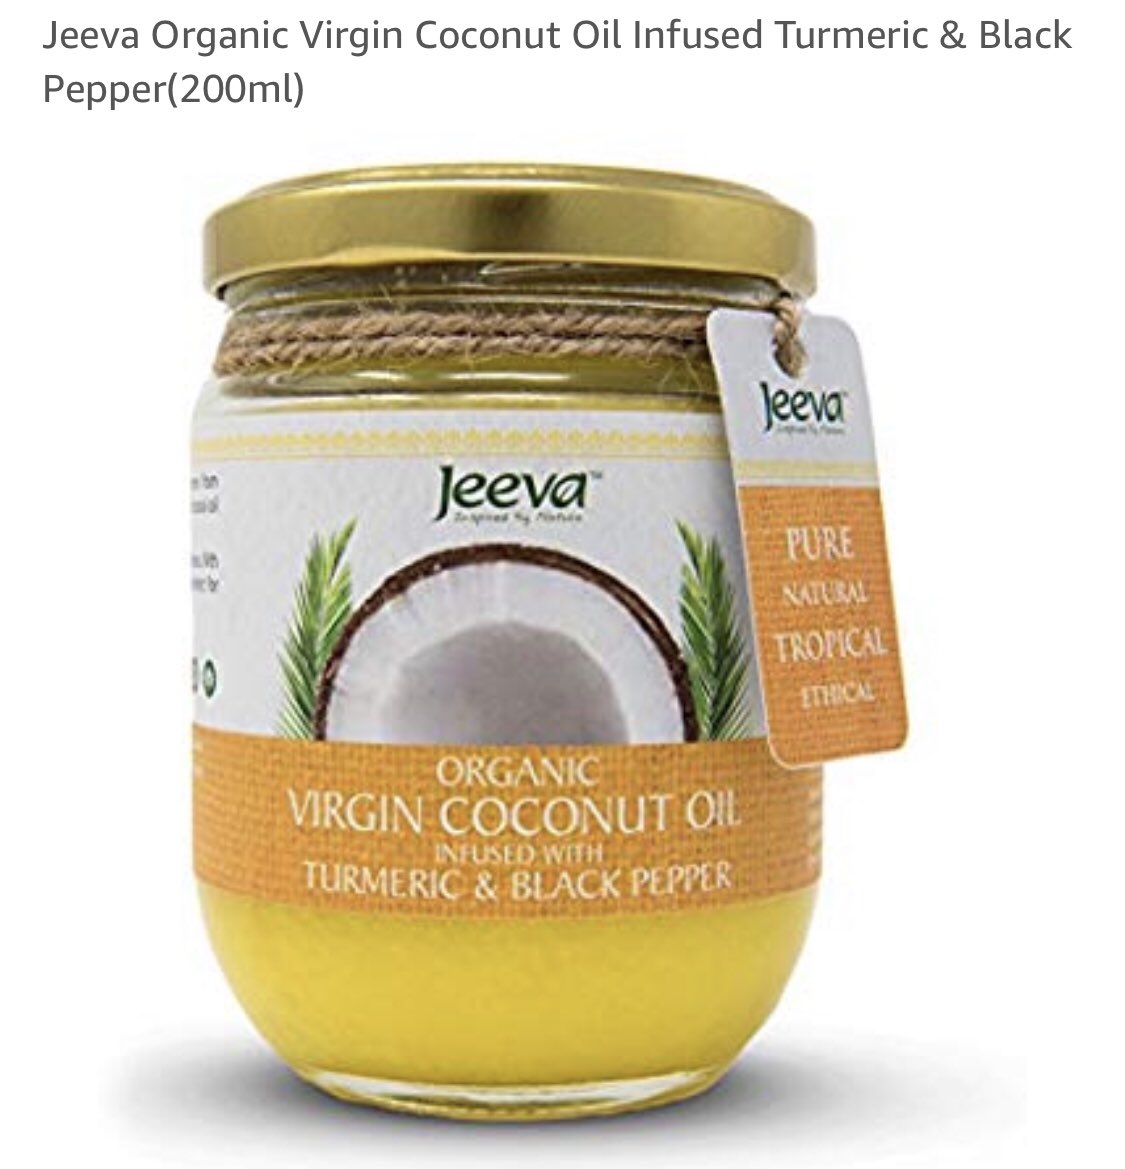 Indian #vegetarian food offers so much scope for flavour & creativity. Build another flavour level in you cooking with Jeeva #coconutoil #tumeric & black pepper Celebrate #NationalVegetarianWeek with us 🥥 bit.ly/2EgWUmb